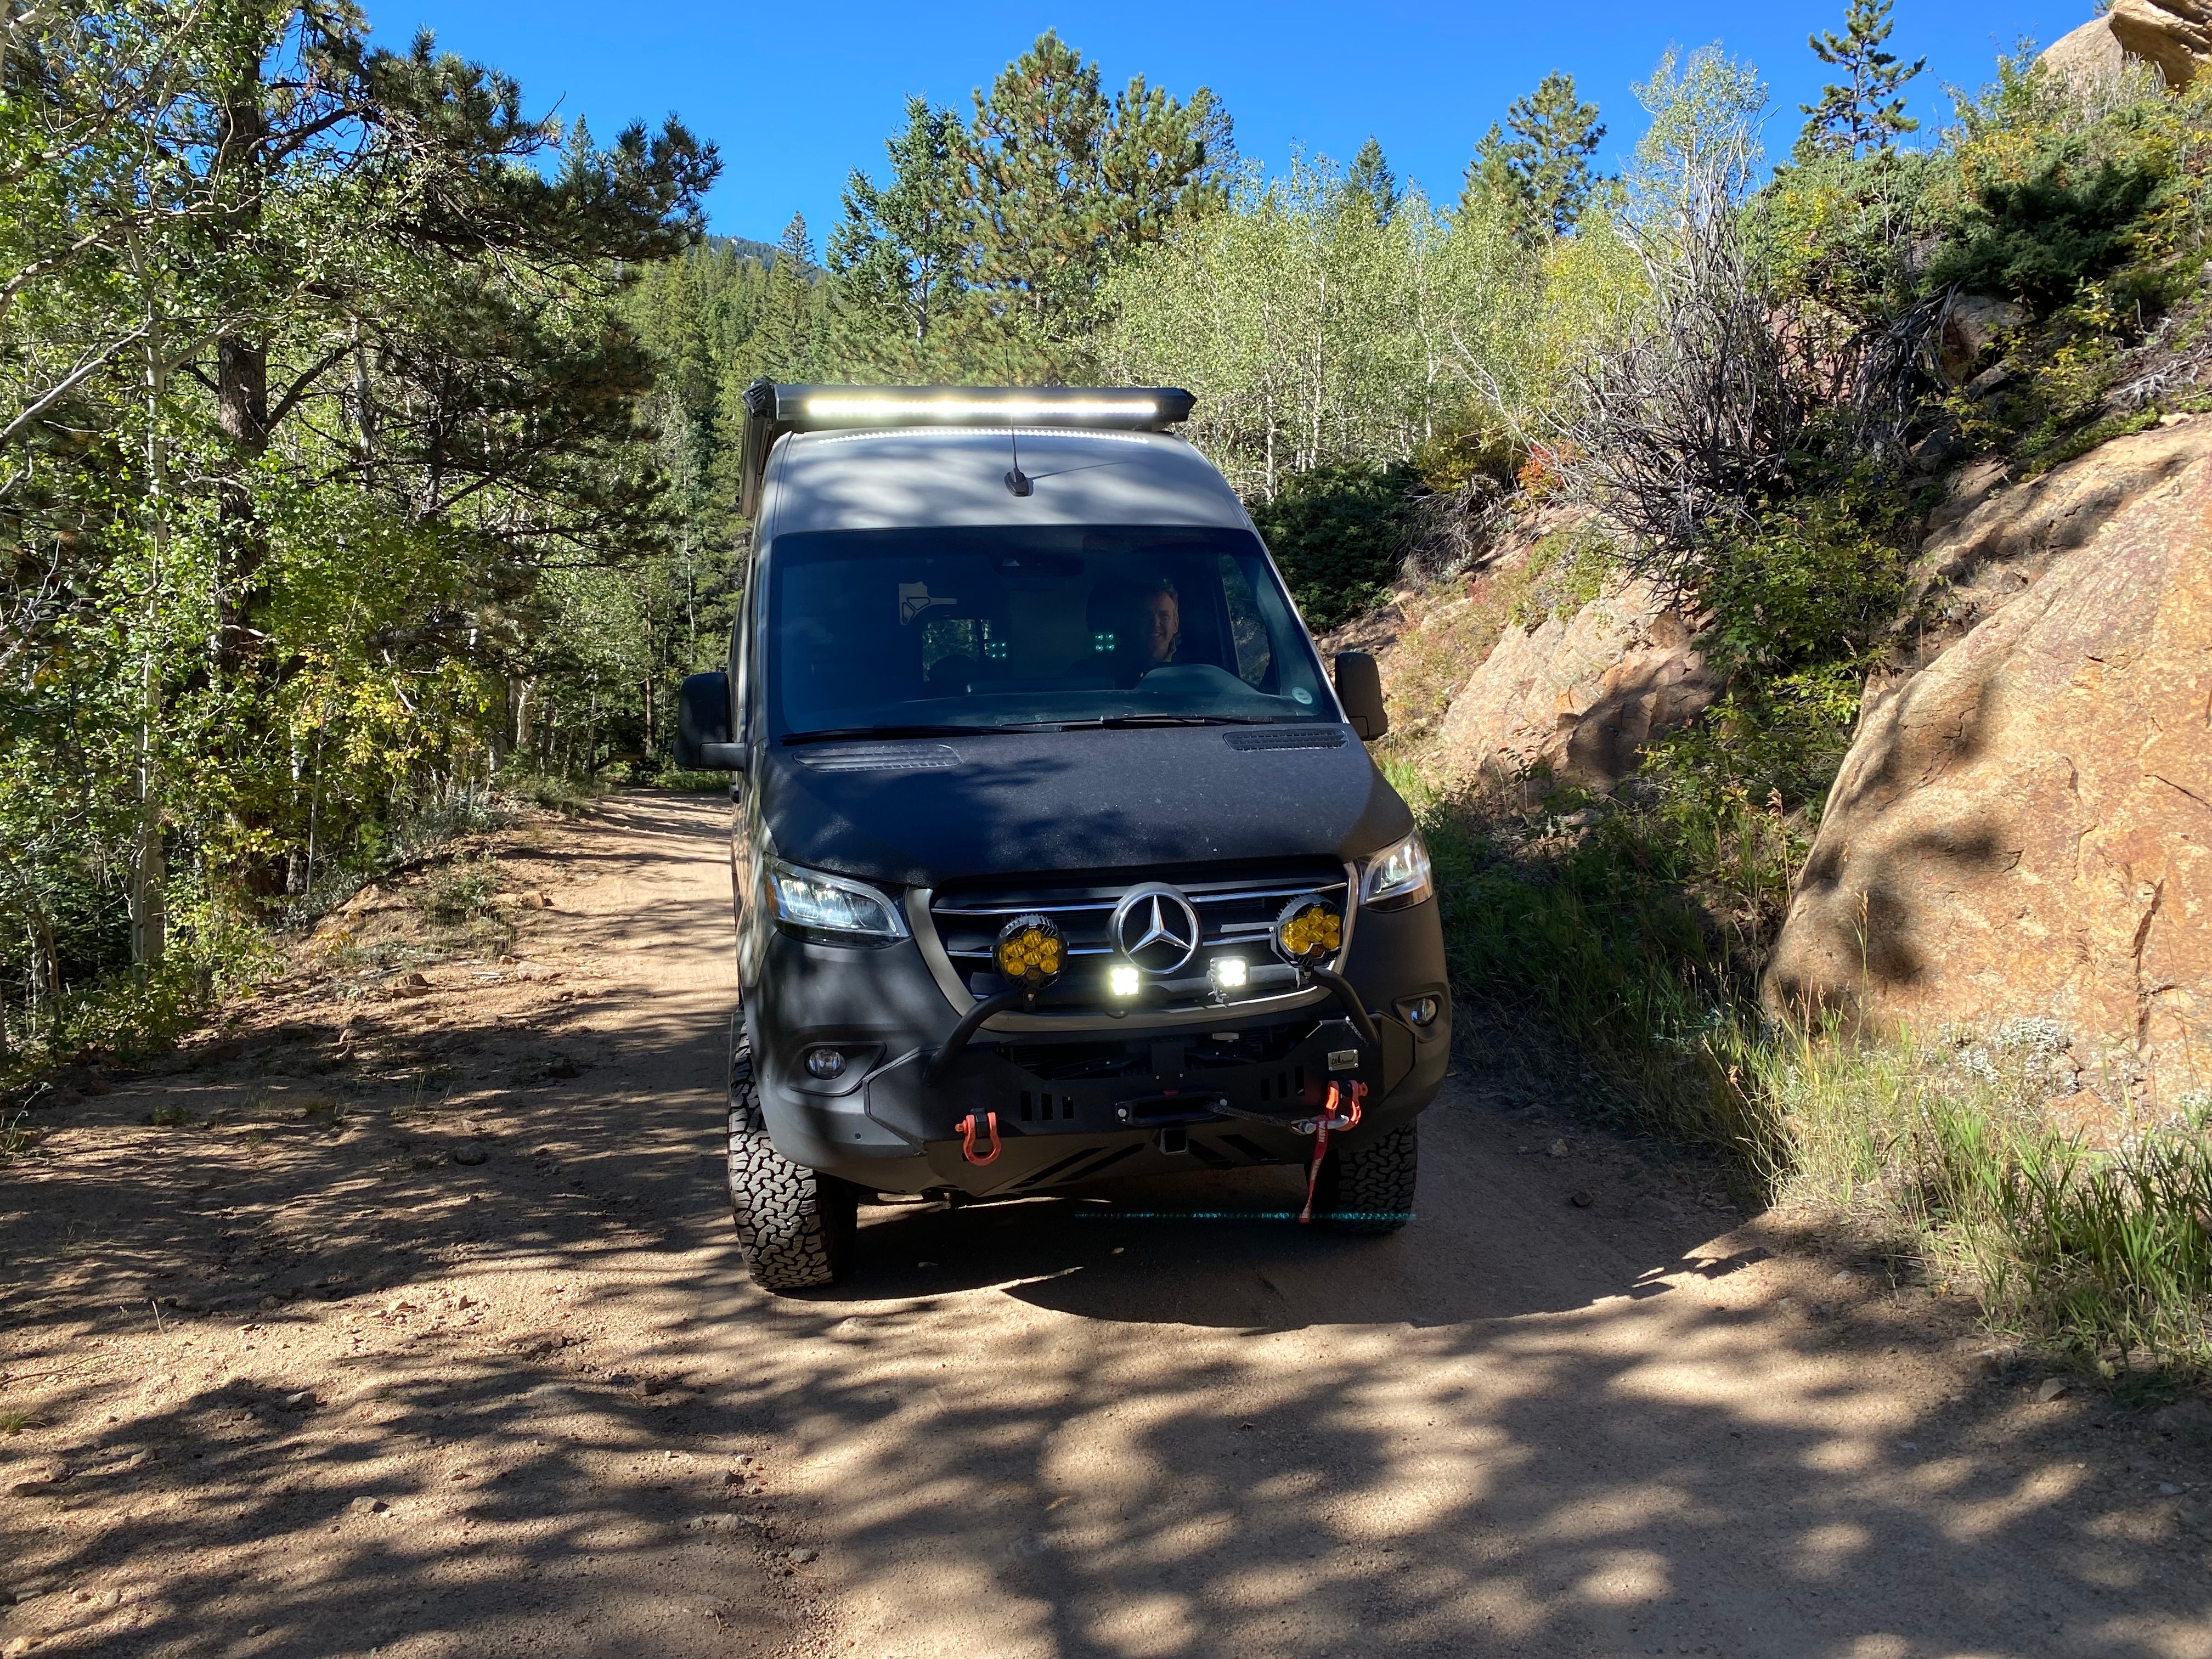 Camper submitted image from Allenspark Dispersed Camping - 4